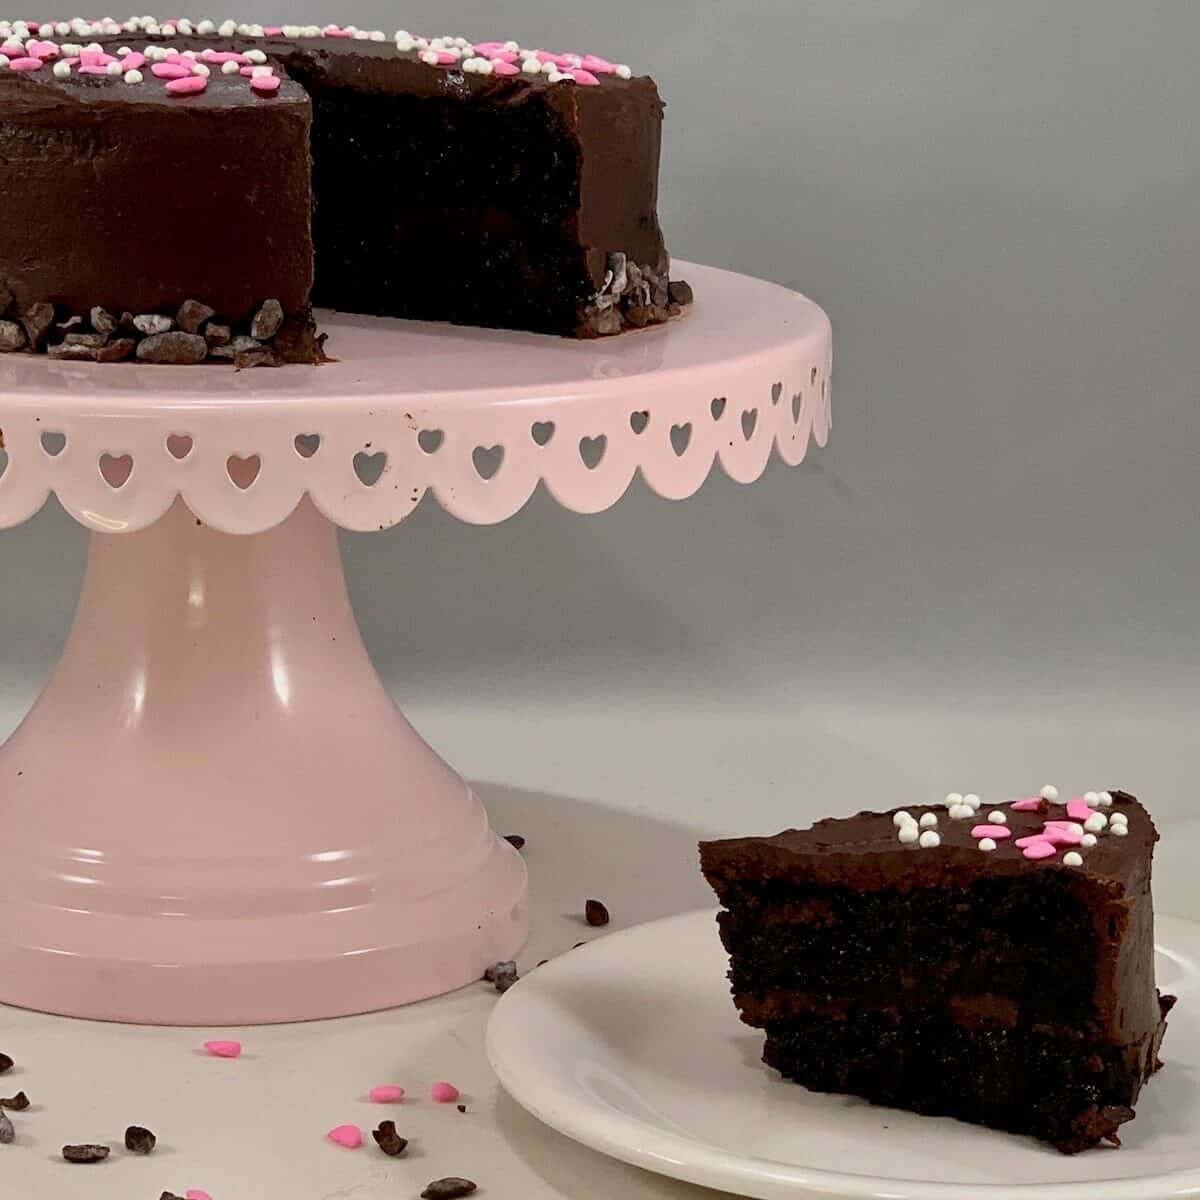 Port wine dark chocolate cake on a pink cake stand with slice on a white plate.